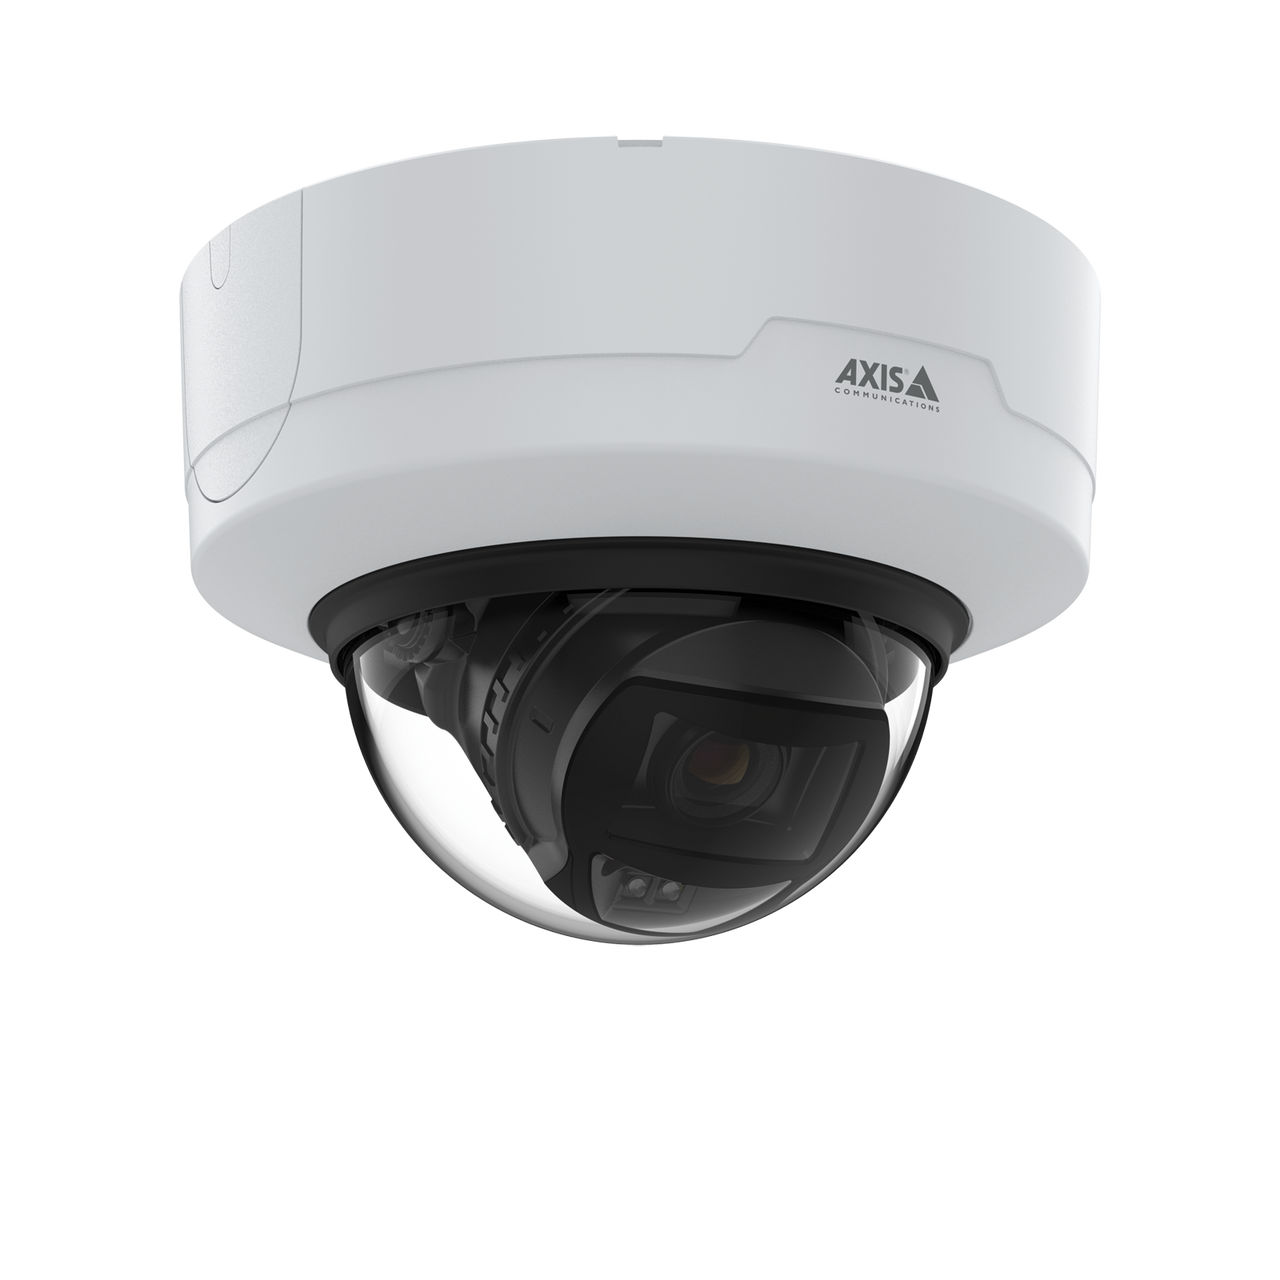 AXIS P3265-LV Indoor 2 MP dome with IR and deep learning